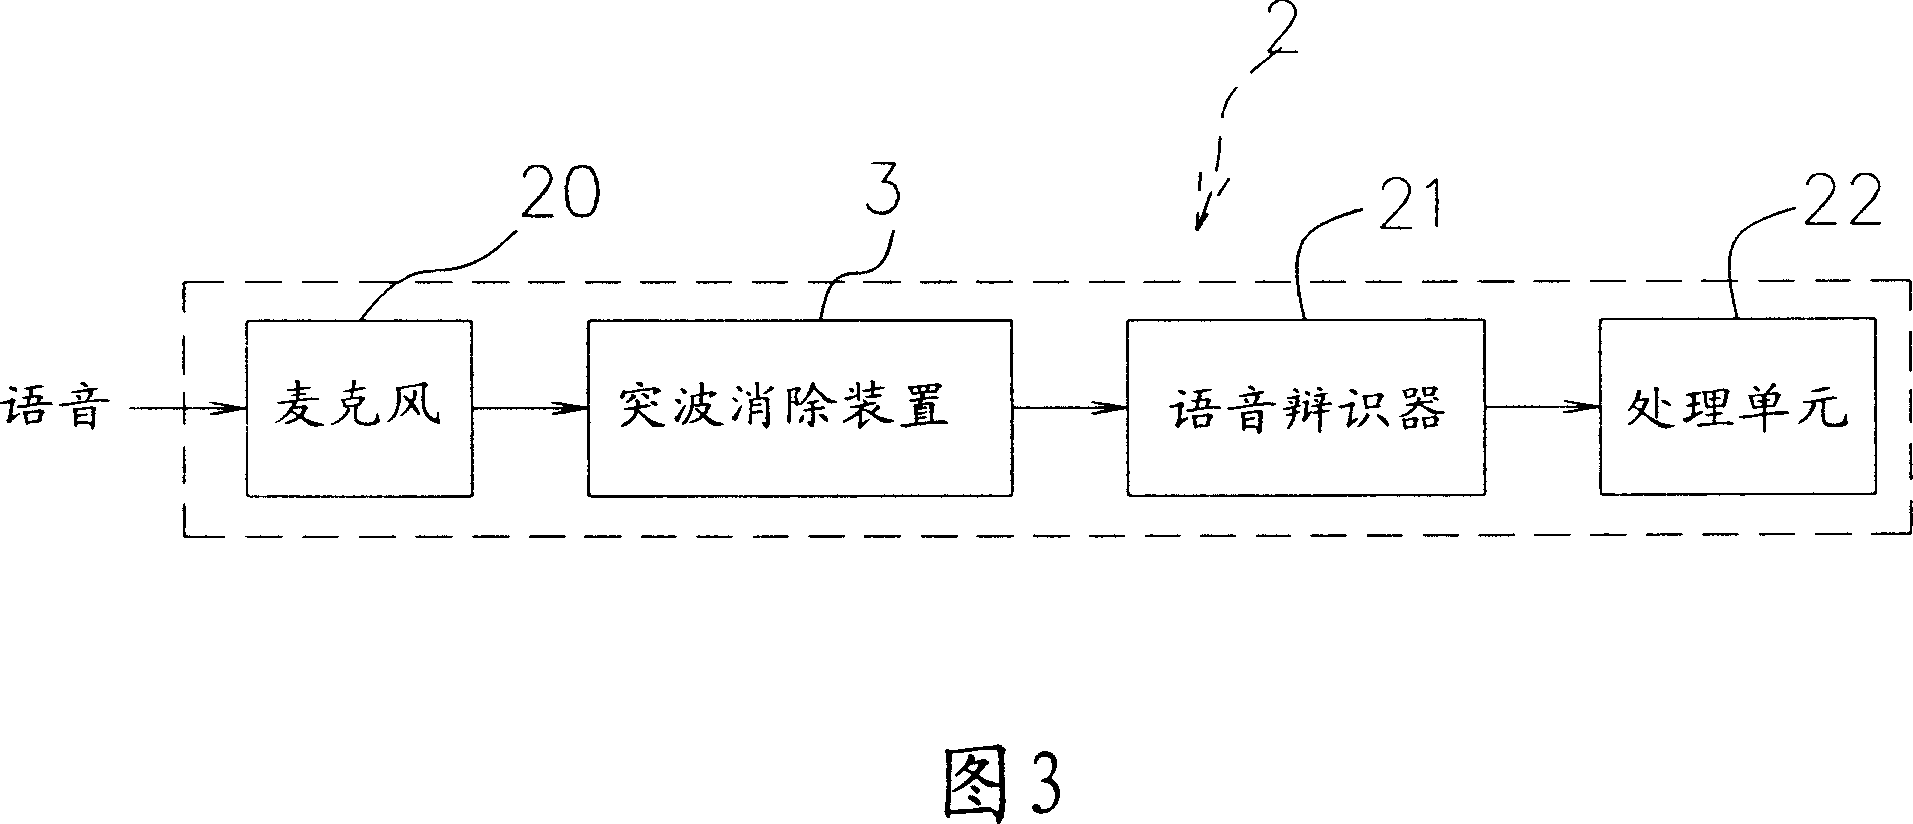 Method and device for eliminating surge in sound recording